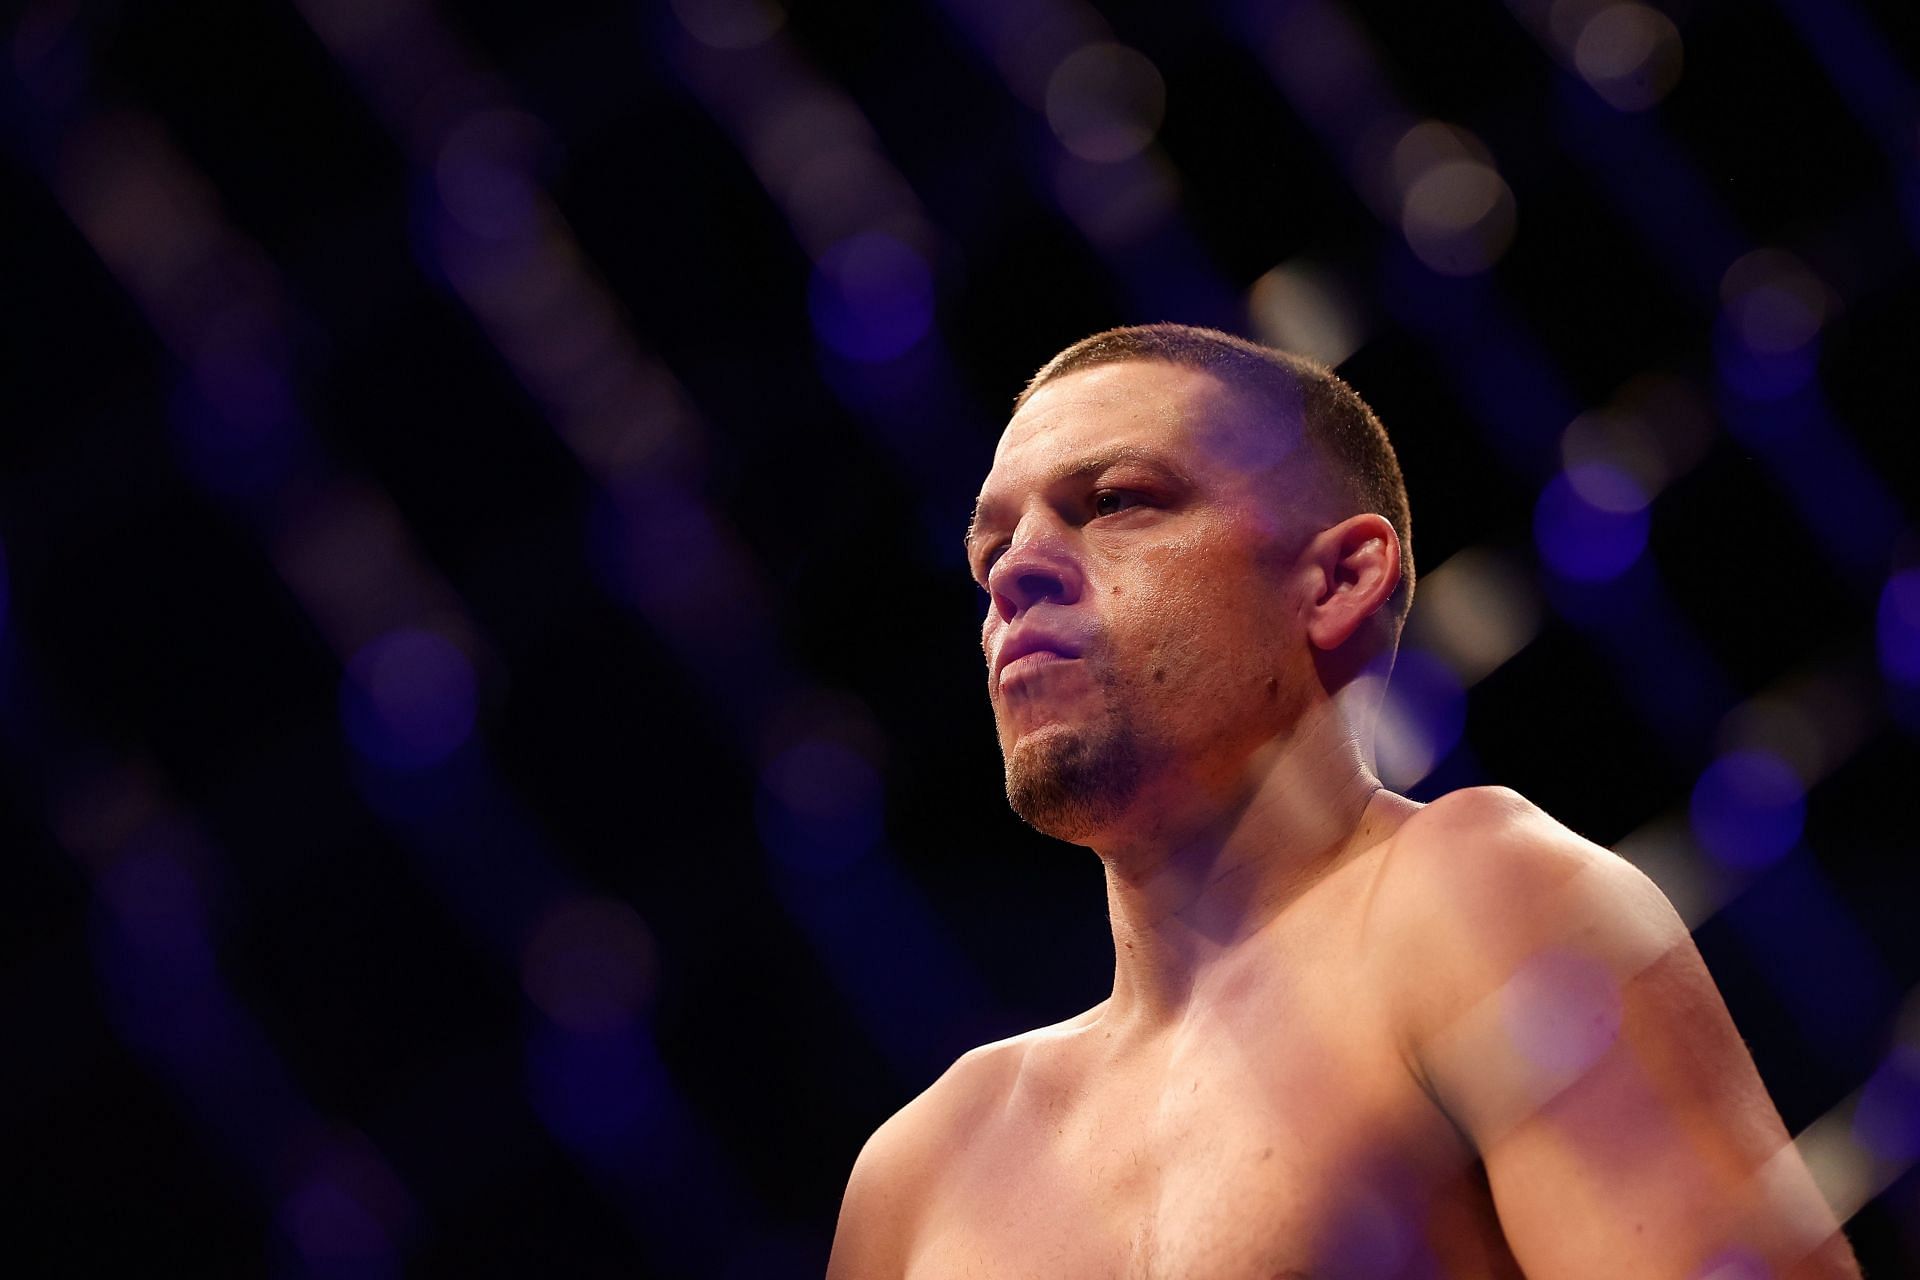 Nate Diaz smokes weed in front of USADA official